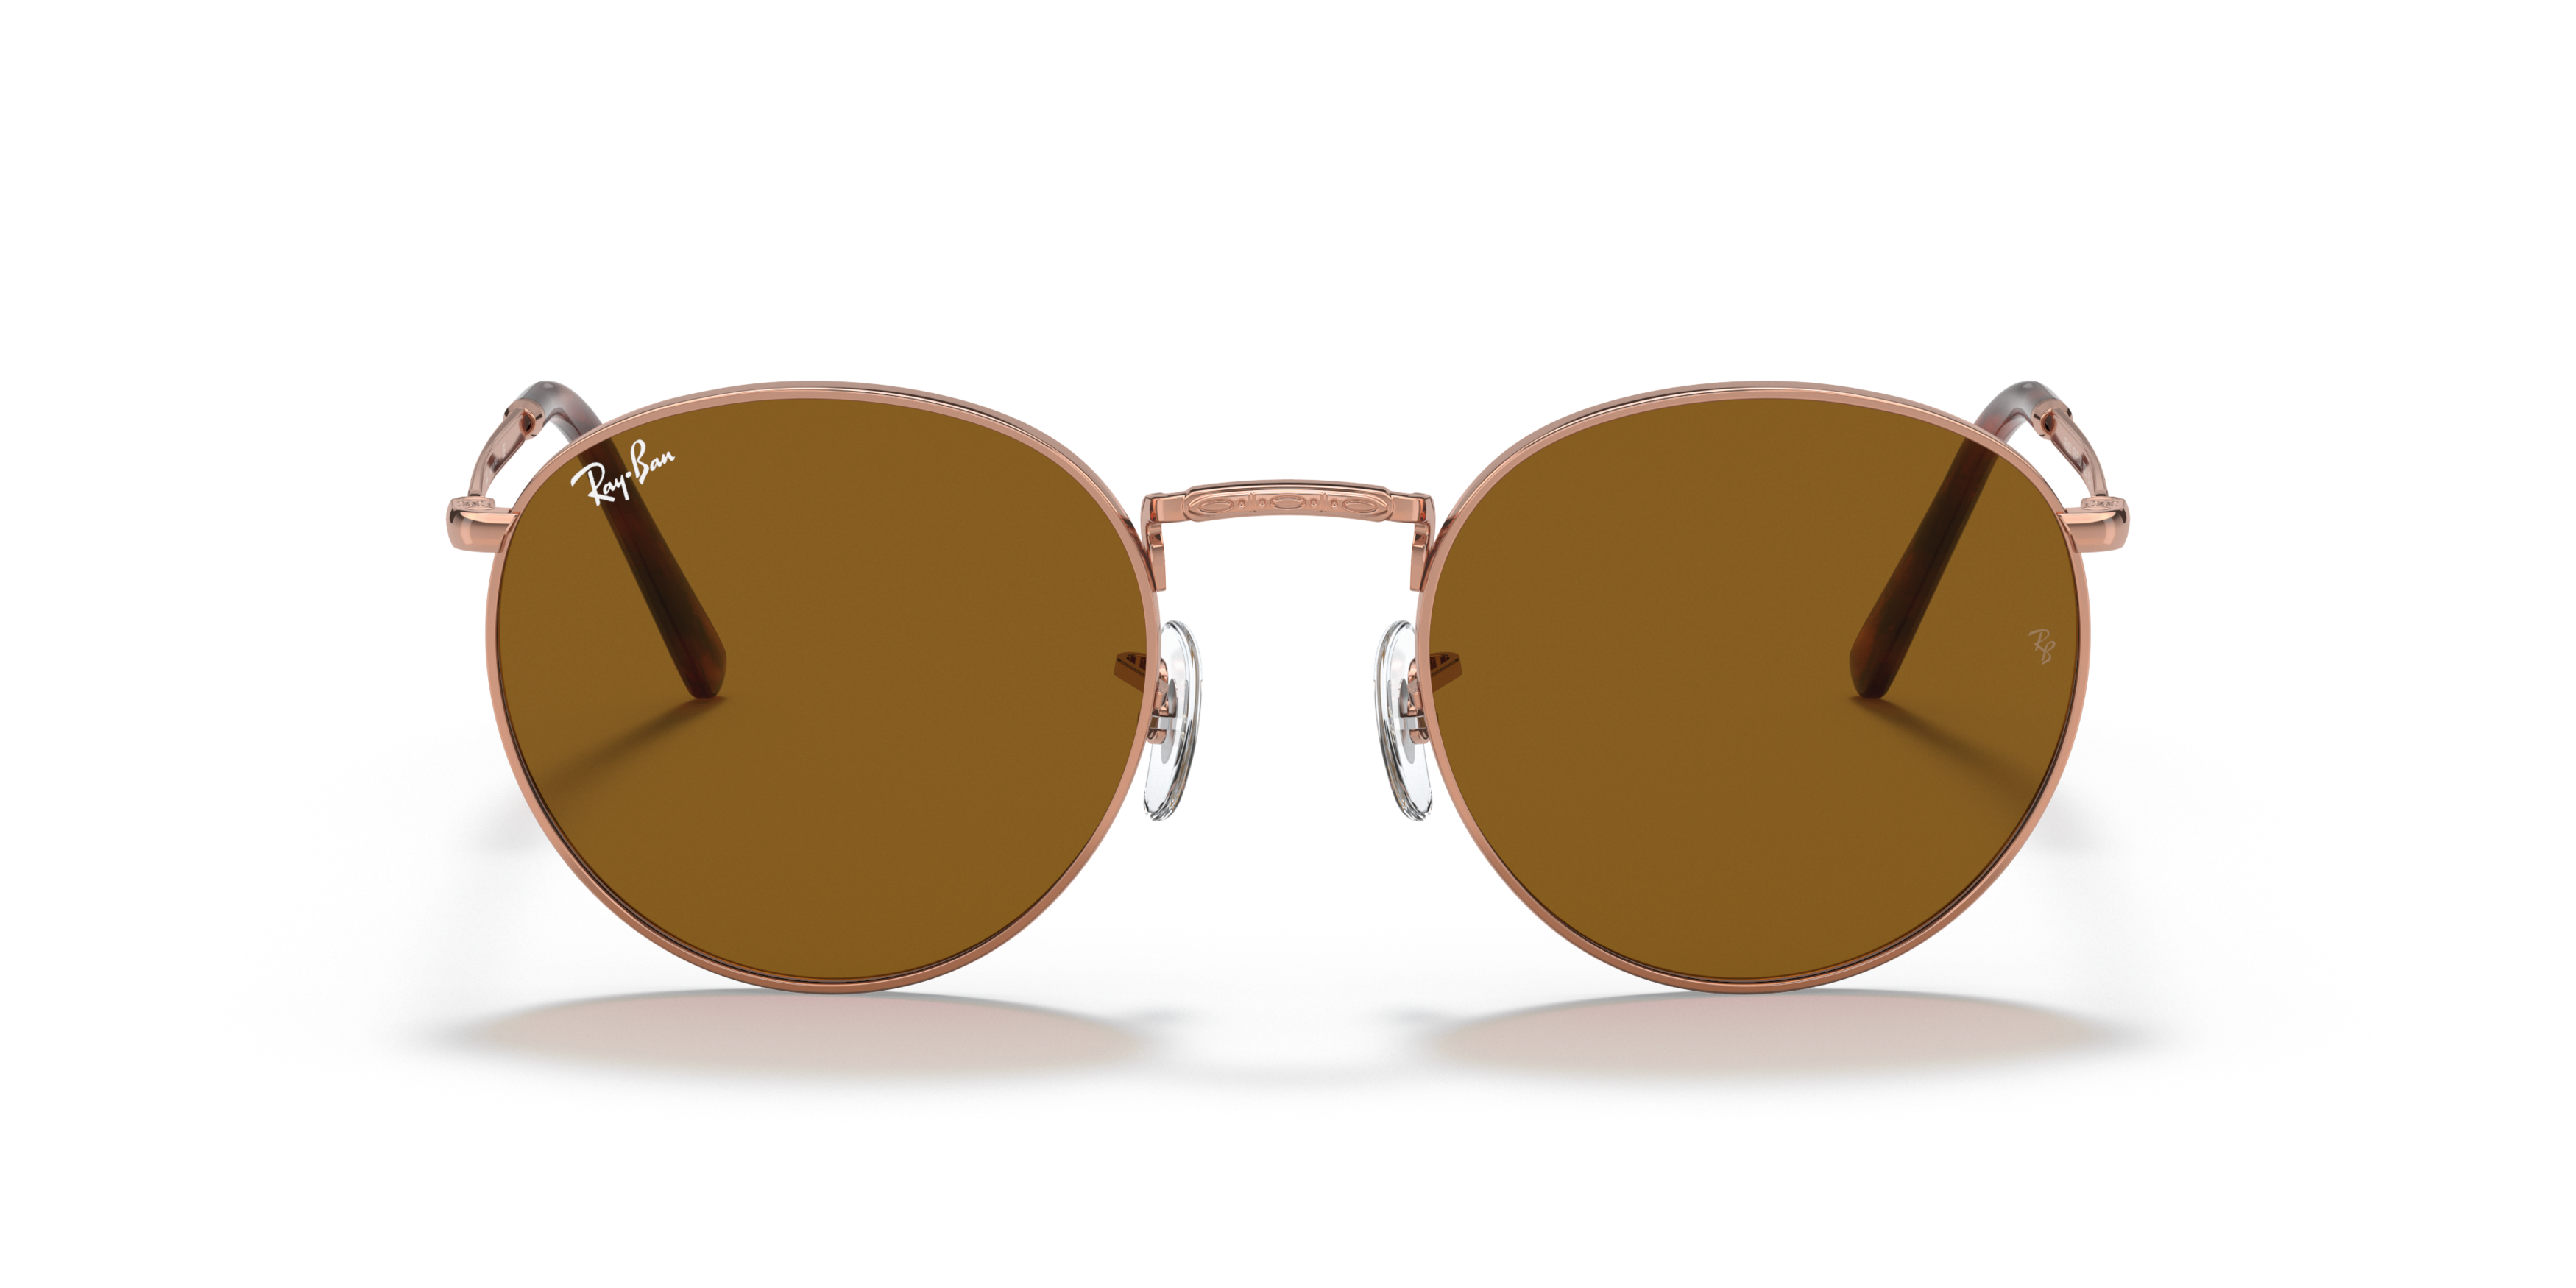 [products.image.front] Ray-Ban New Round RB3637 920233